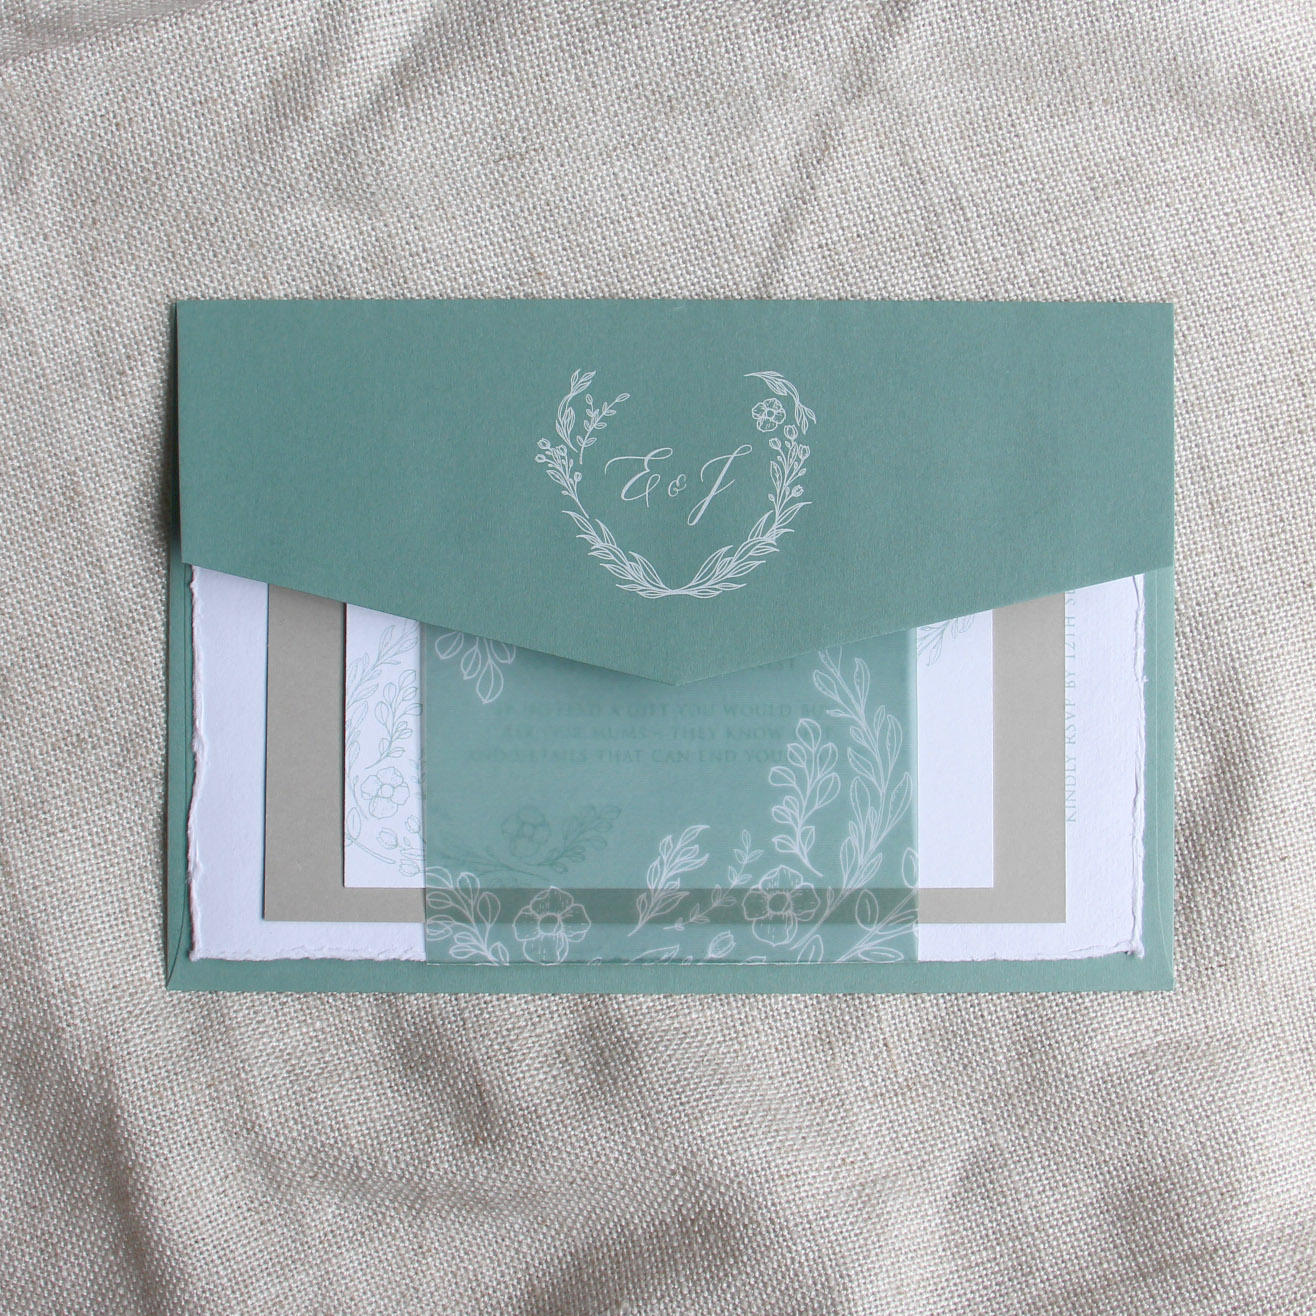 What Size Envelope For 5x7 Invitation